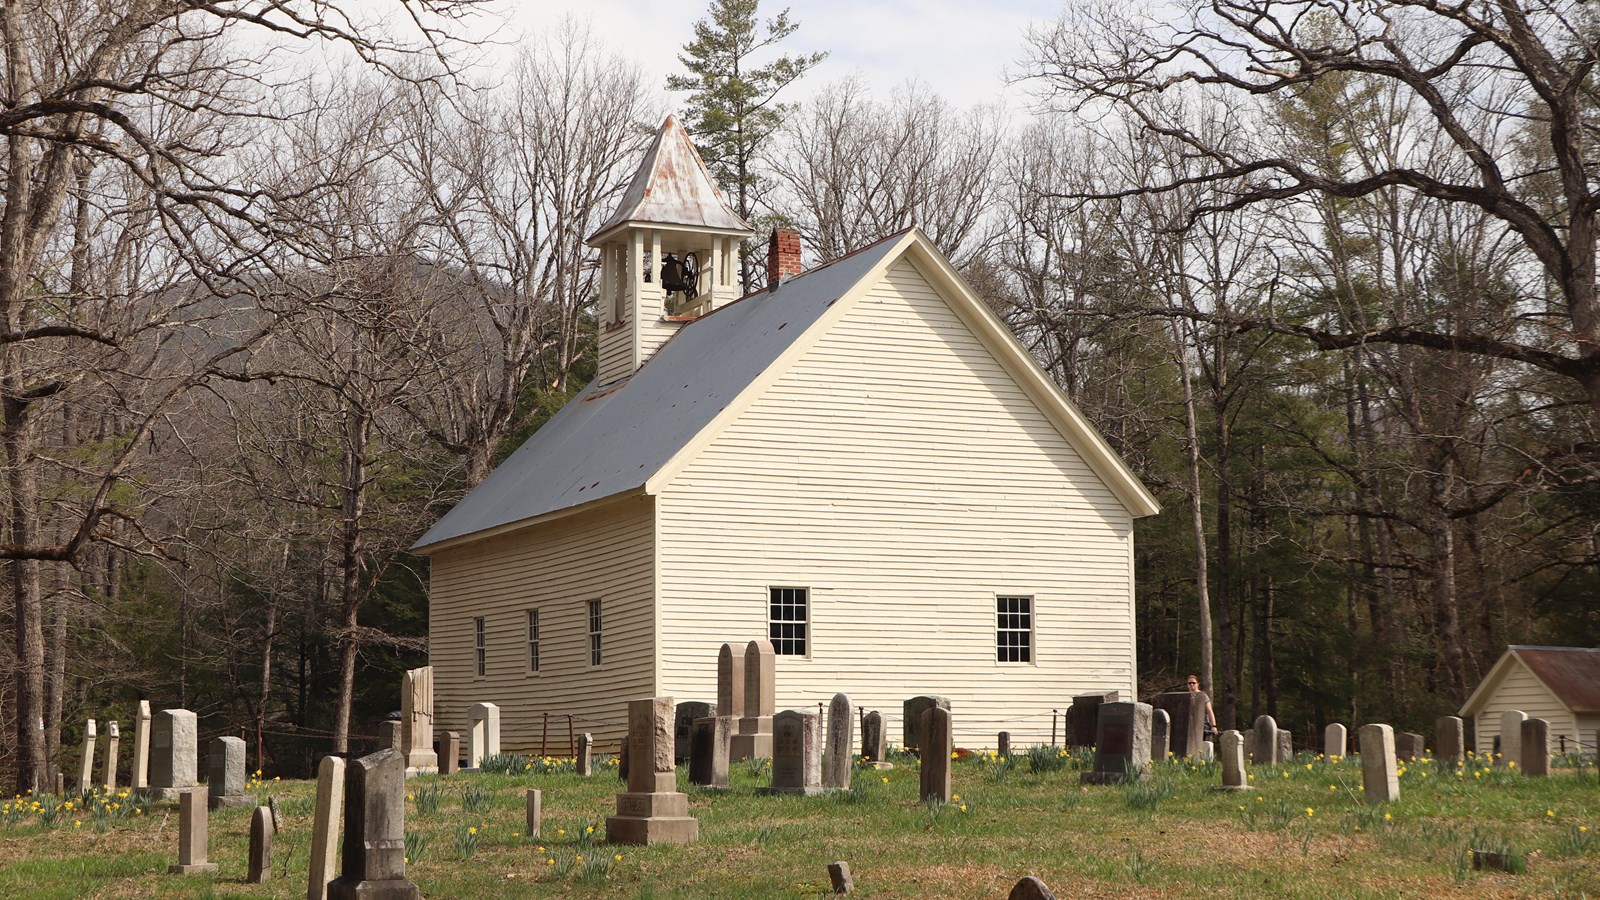 A nineteenth century frame church with a white exterior.